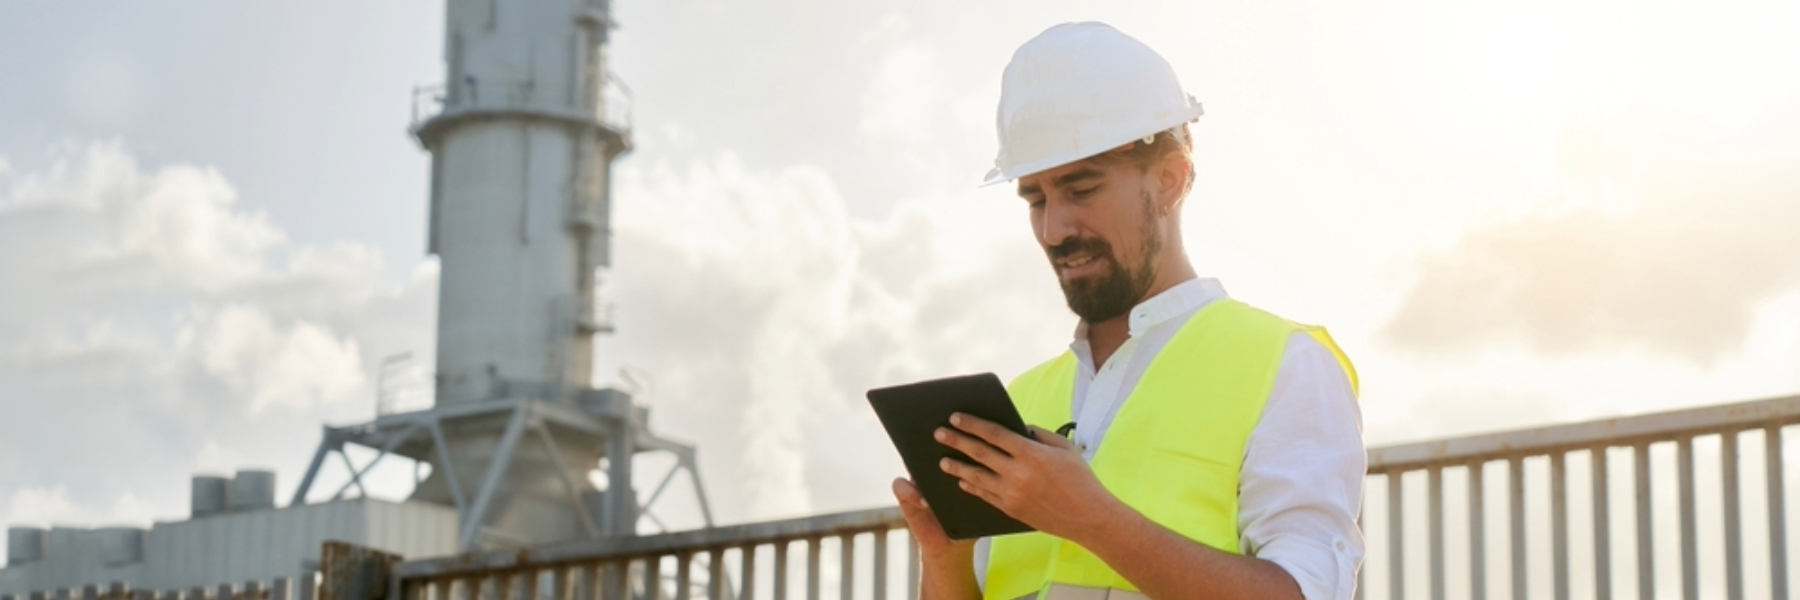 Engineer using tablet outside of energy generator plant